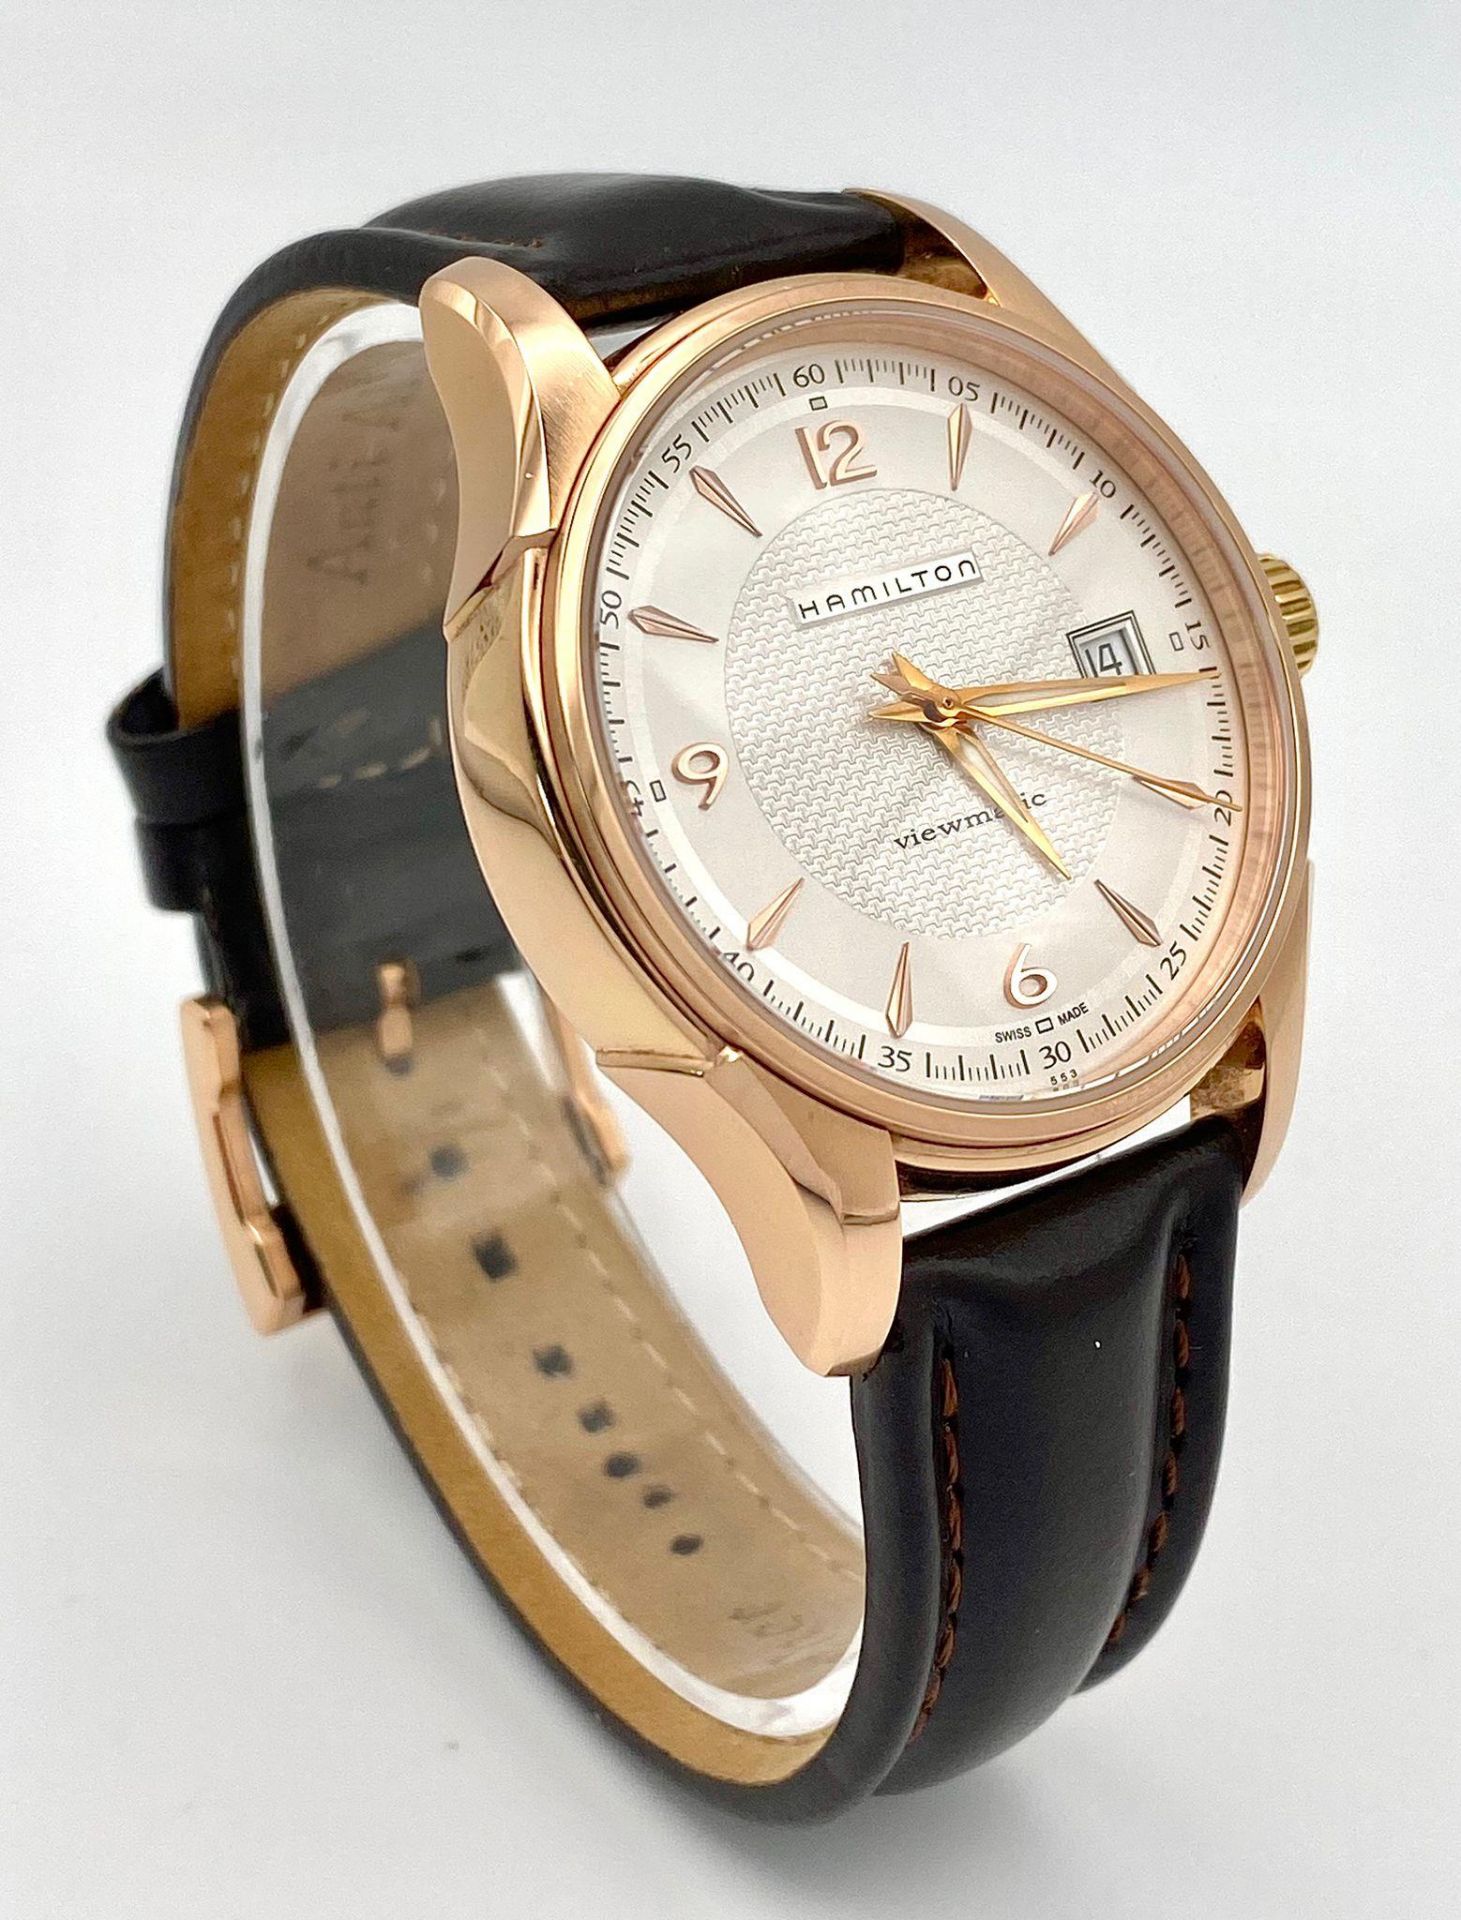 An Excellent Condition Hamilton Viewmatic Jazzmaster Rose Gold Plated Automatic Date Watch Model - Image 3 of 9